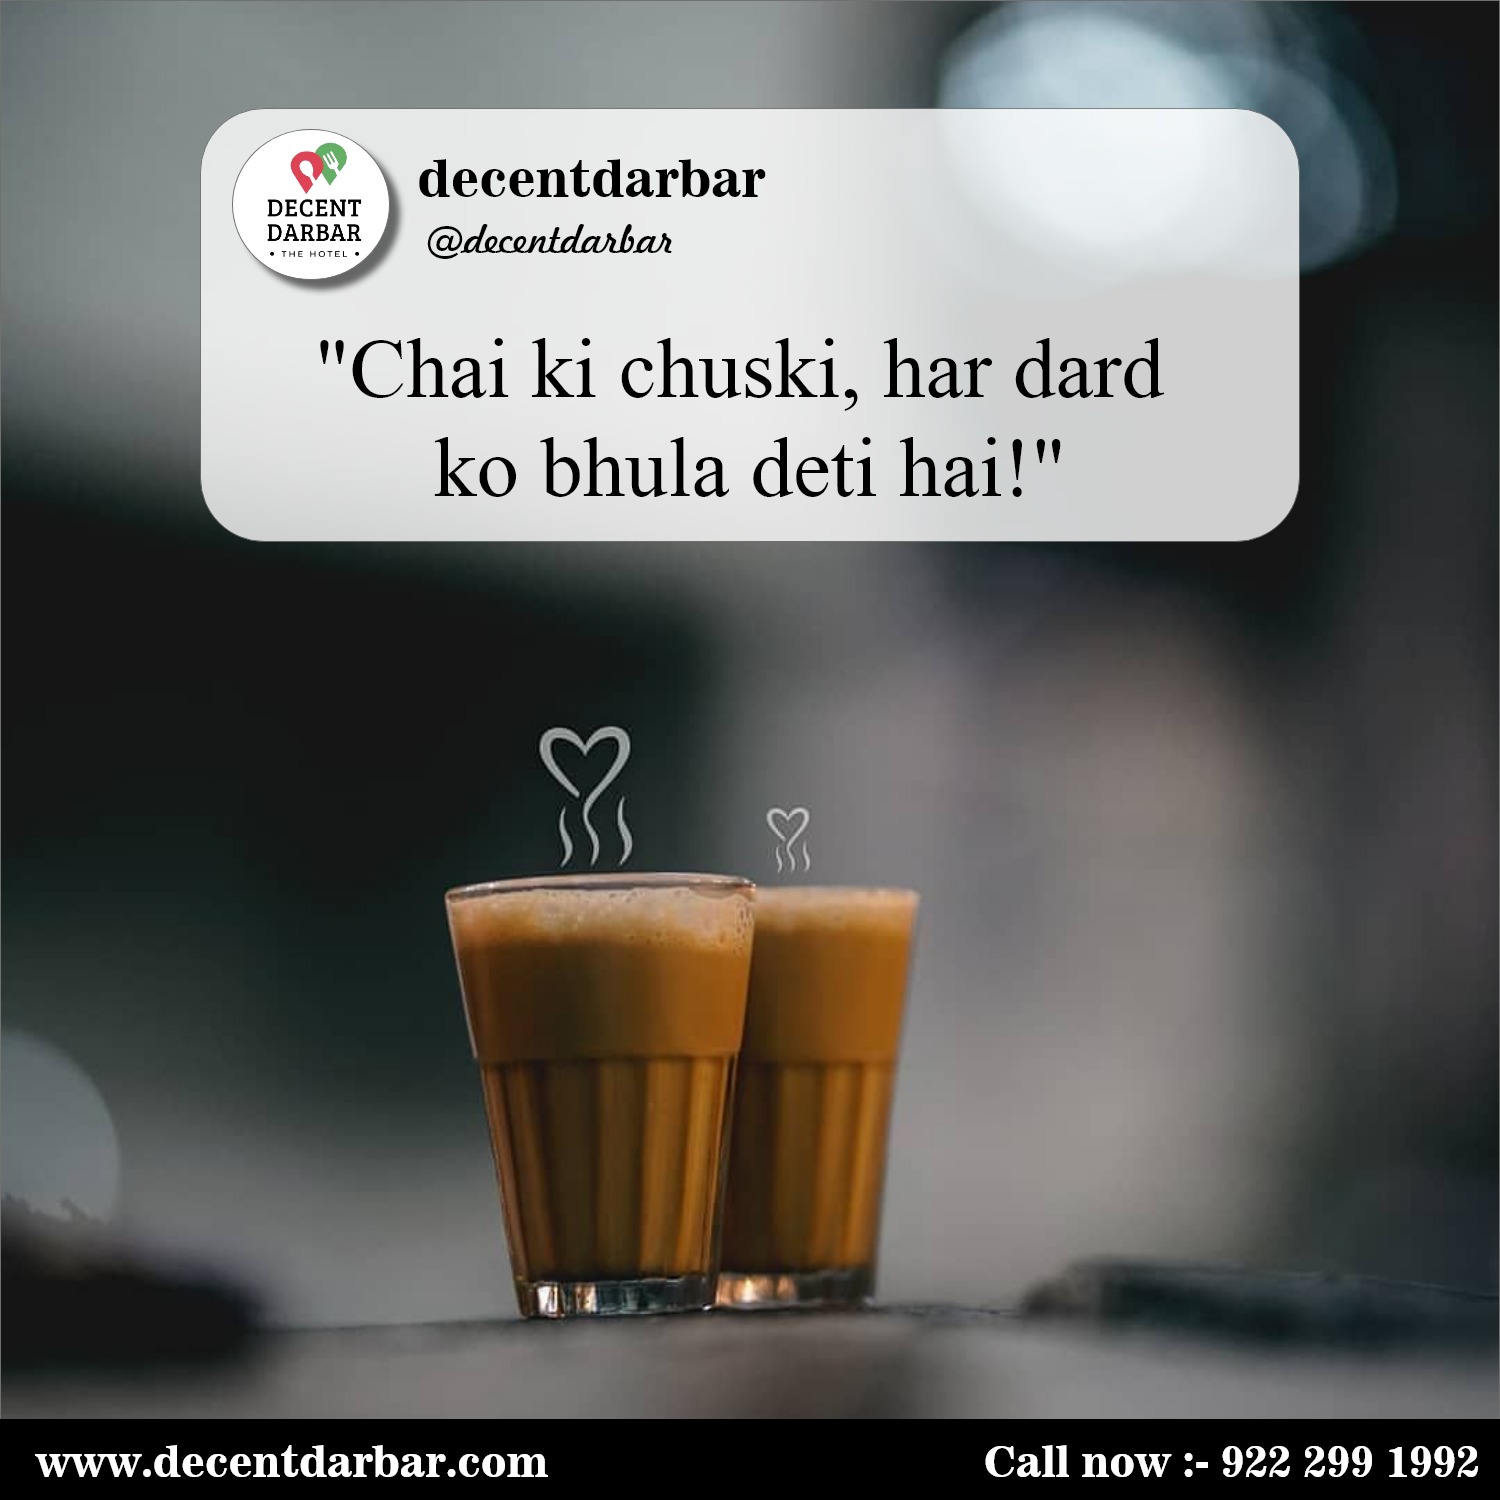 "Enjoying a soothing cup of chai at Decent Darbar 